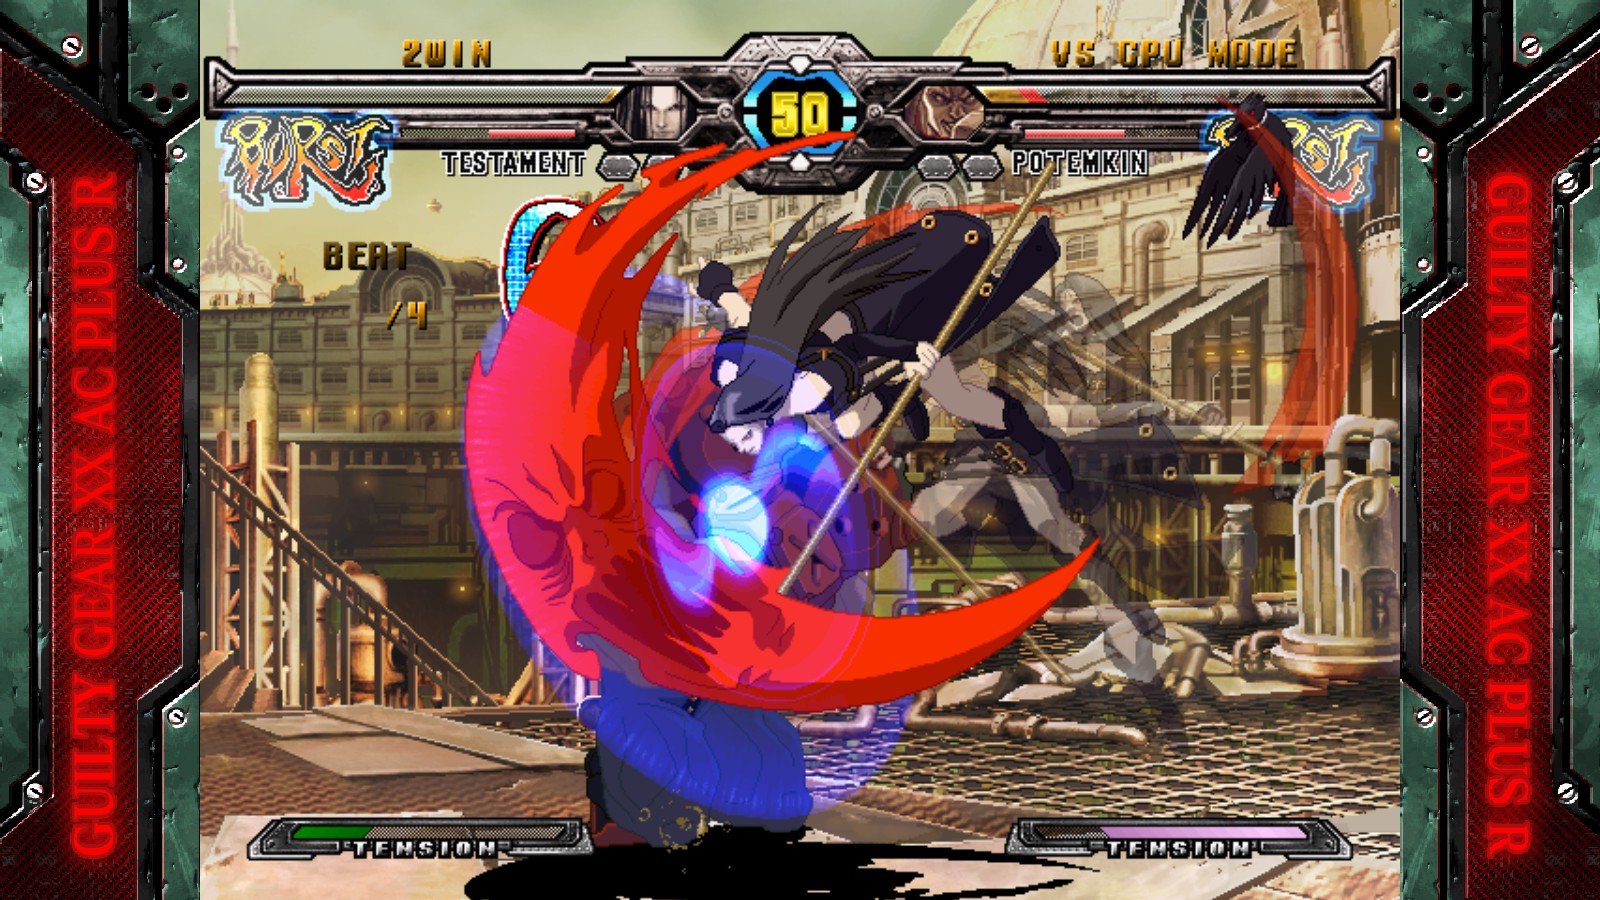 GUILTY GEAR XX ACCENT CORE PLUS R on Steam